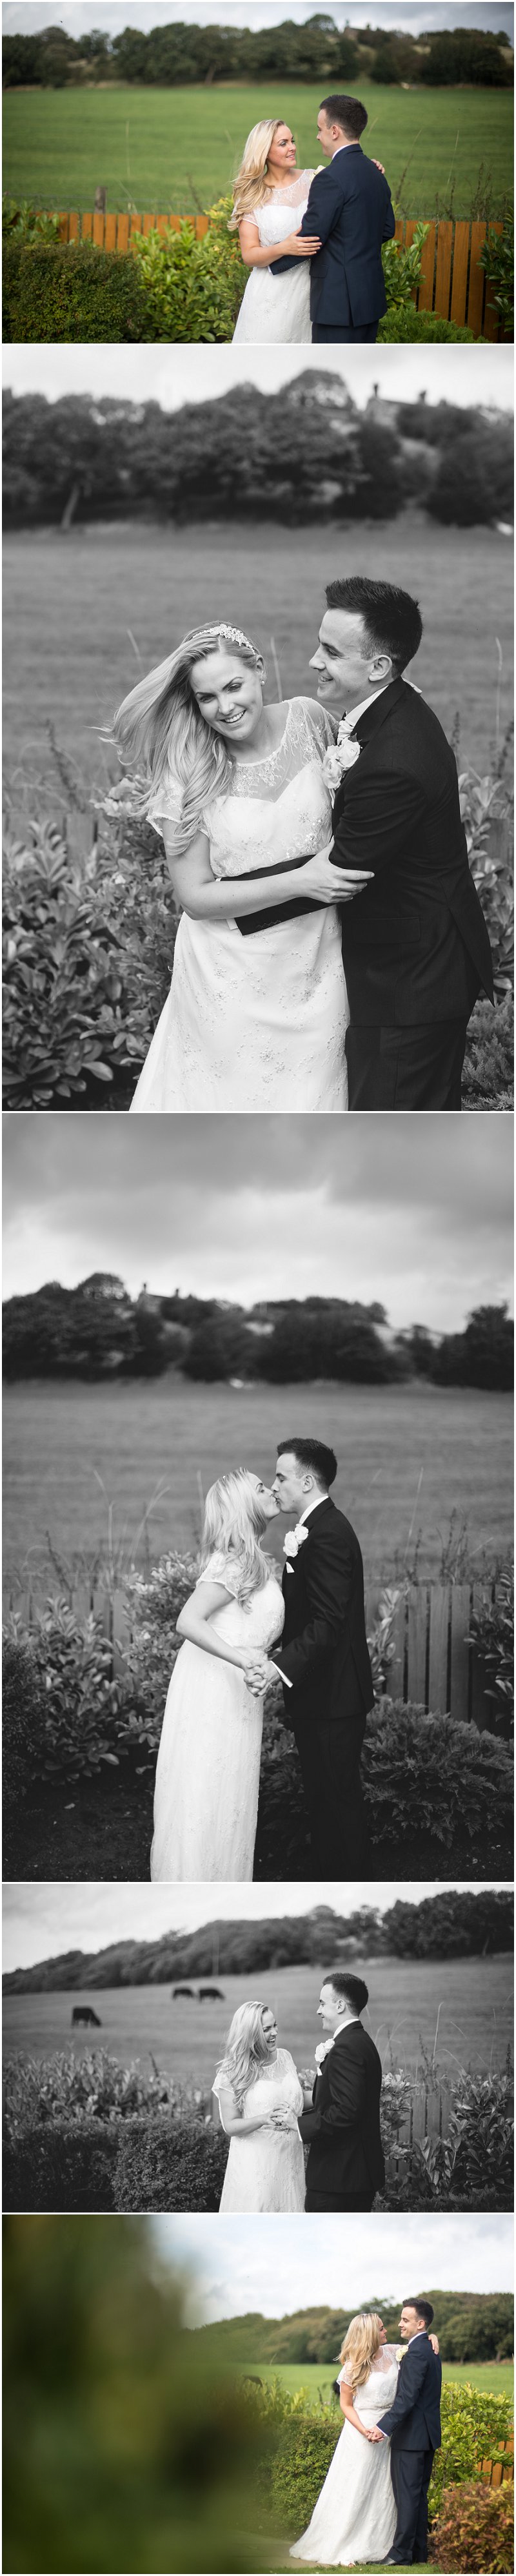 Bride and groom during couples portraits in Bury wedding